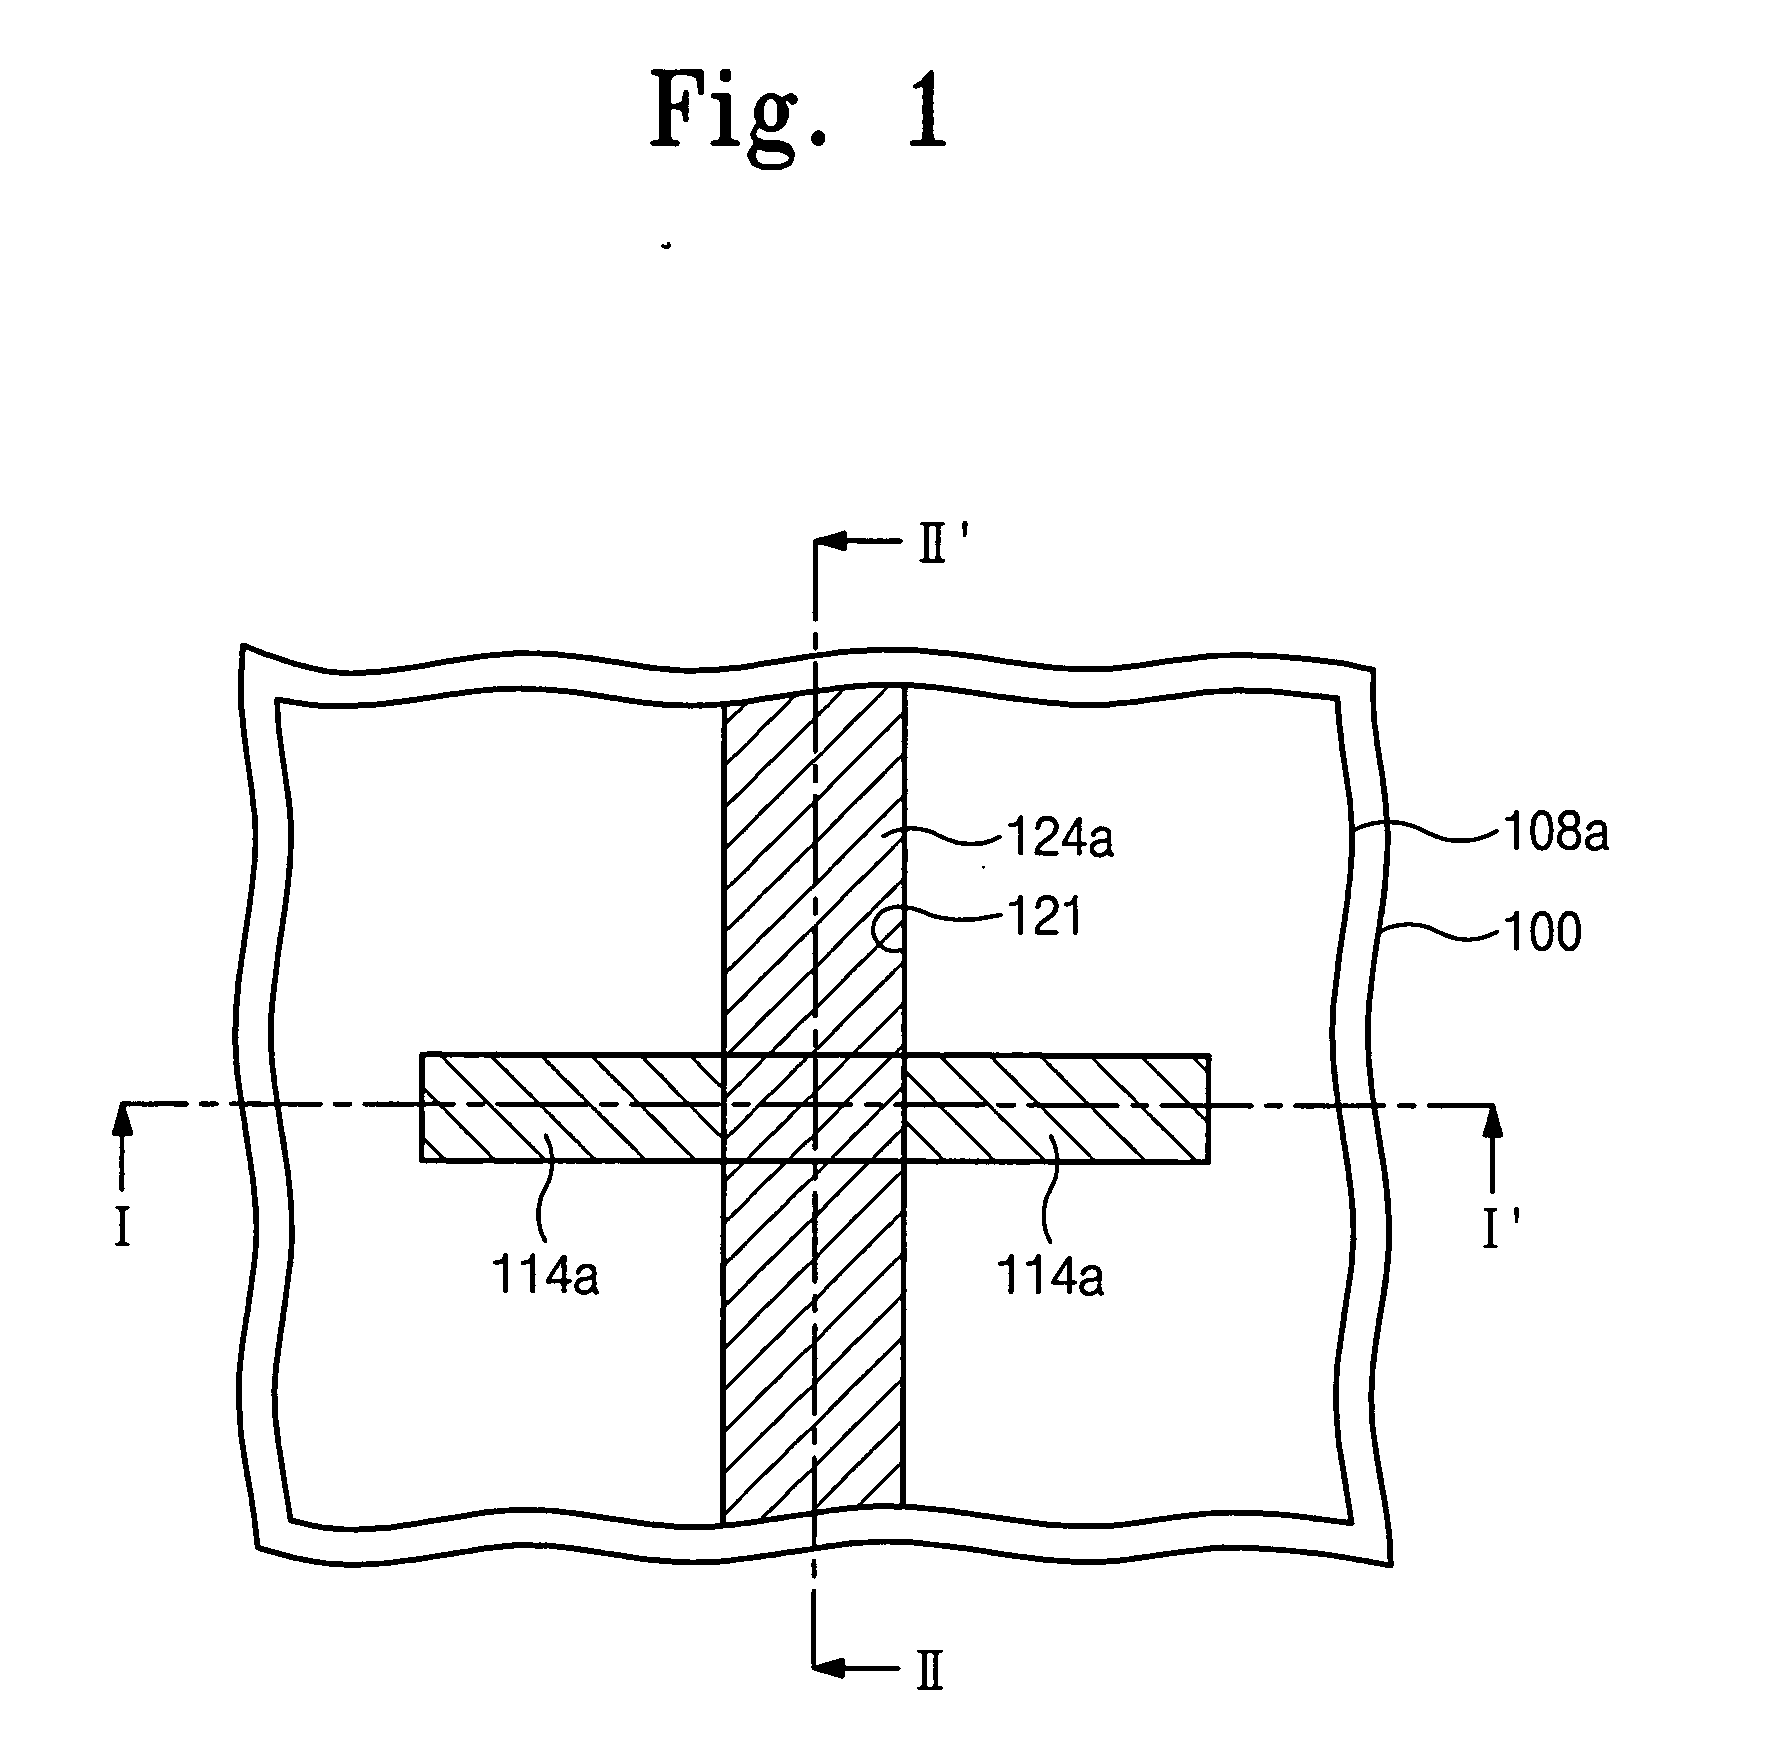 Semiconductor devices having field effect transistors and methods of fabricating the same